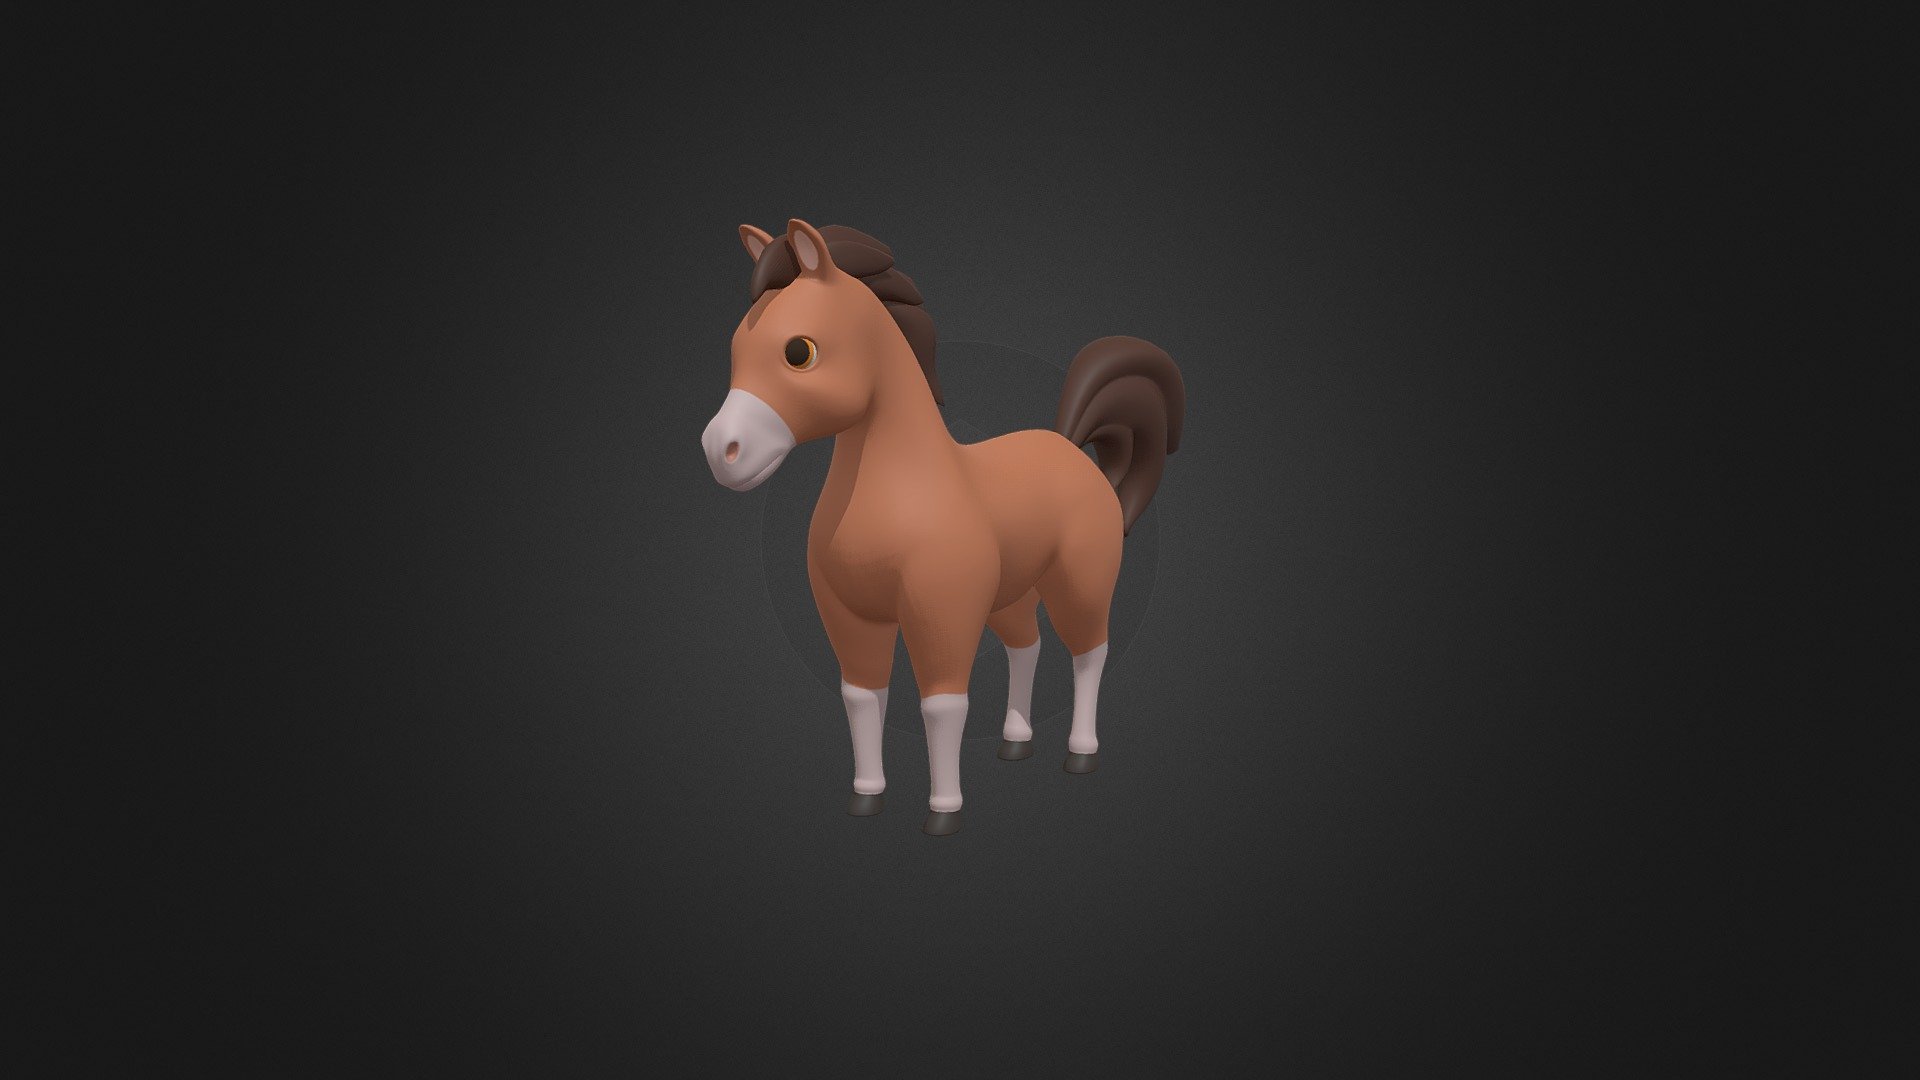 *Description




-3d model of Cartoons Horse Rig.

-This 3D model is best for use in games.

-The model is equipped with all required PBR textures.

-Model is built with great attention to details and realistic proportions with correct geometry.

-Textures are very detailed so it makes this model good enough for close-up.

*Technical details:




-Full PBR textures sets. 

-The model is divided into few manys object.

-Model is completely unwrapped.

-Model is fully textured with all materials applied.

-Pivot points are correctly placed to suit optional animation process.

-Model scaled to approximate real world size (centimeters).

-All nodes, materials and textures are appropriately named.

*Rig:




-Advanced rigging for the face and body.

*Available file formats:




-Maya files and example render scenes.(packed and regular-unpacked)

-Maya (.ma)

-Autodesk FBX (.fbx)

*Additional Info:




-This model is not intended for 3D printing.
 - Asset - Cartoons - Animal - Horse Rigged - Buy Royalty Free 3D model by InCom Studio (@incomstudio) 3d model